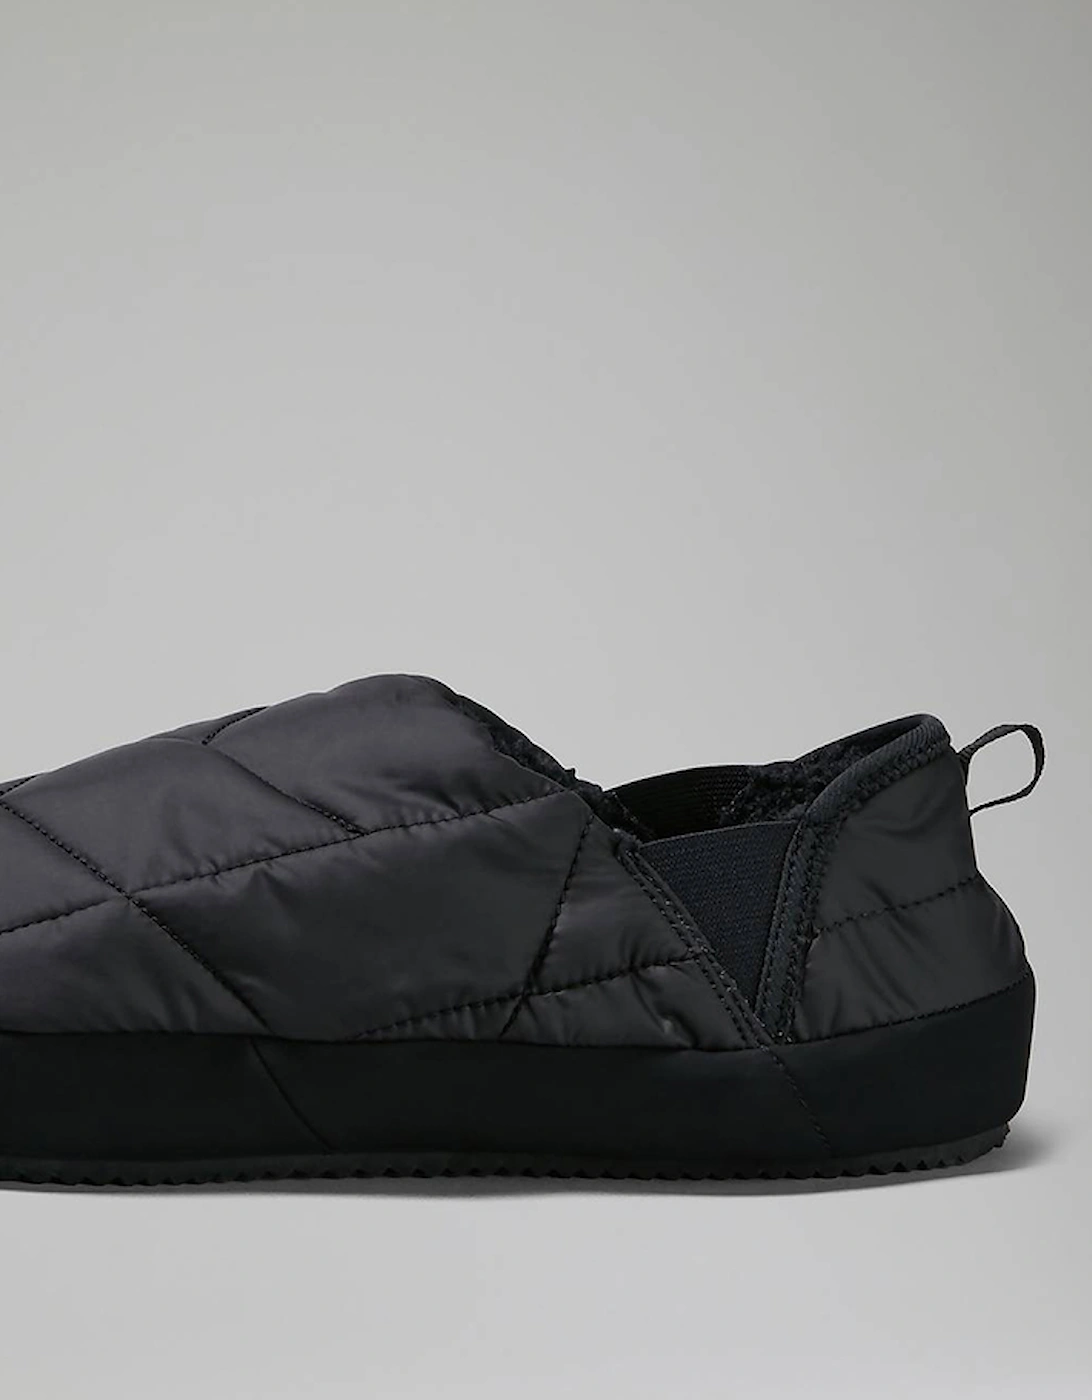 Men's Bothy 2.0 Synthetic Insulated Slippers